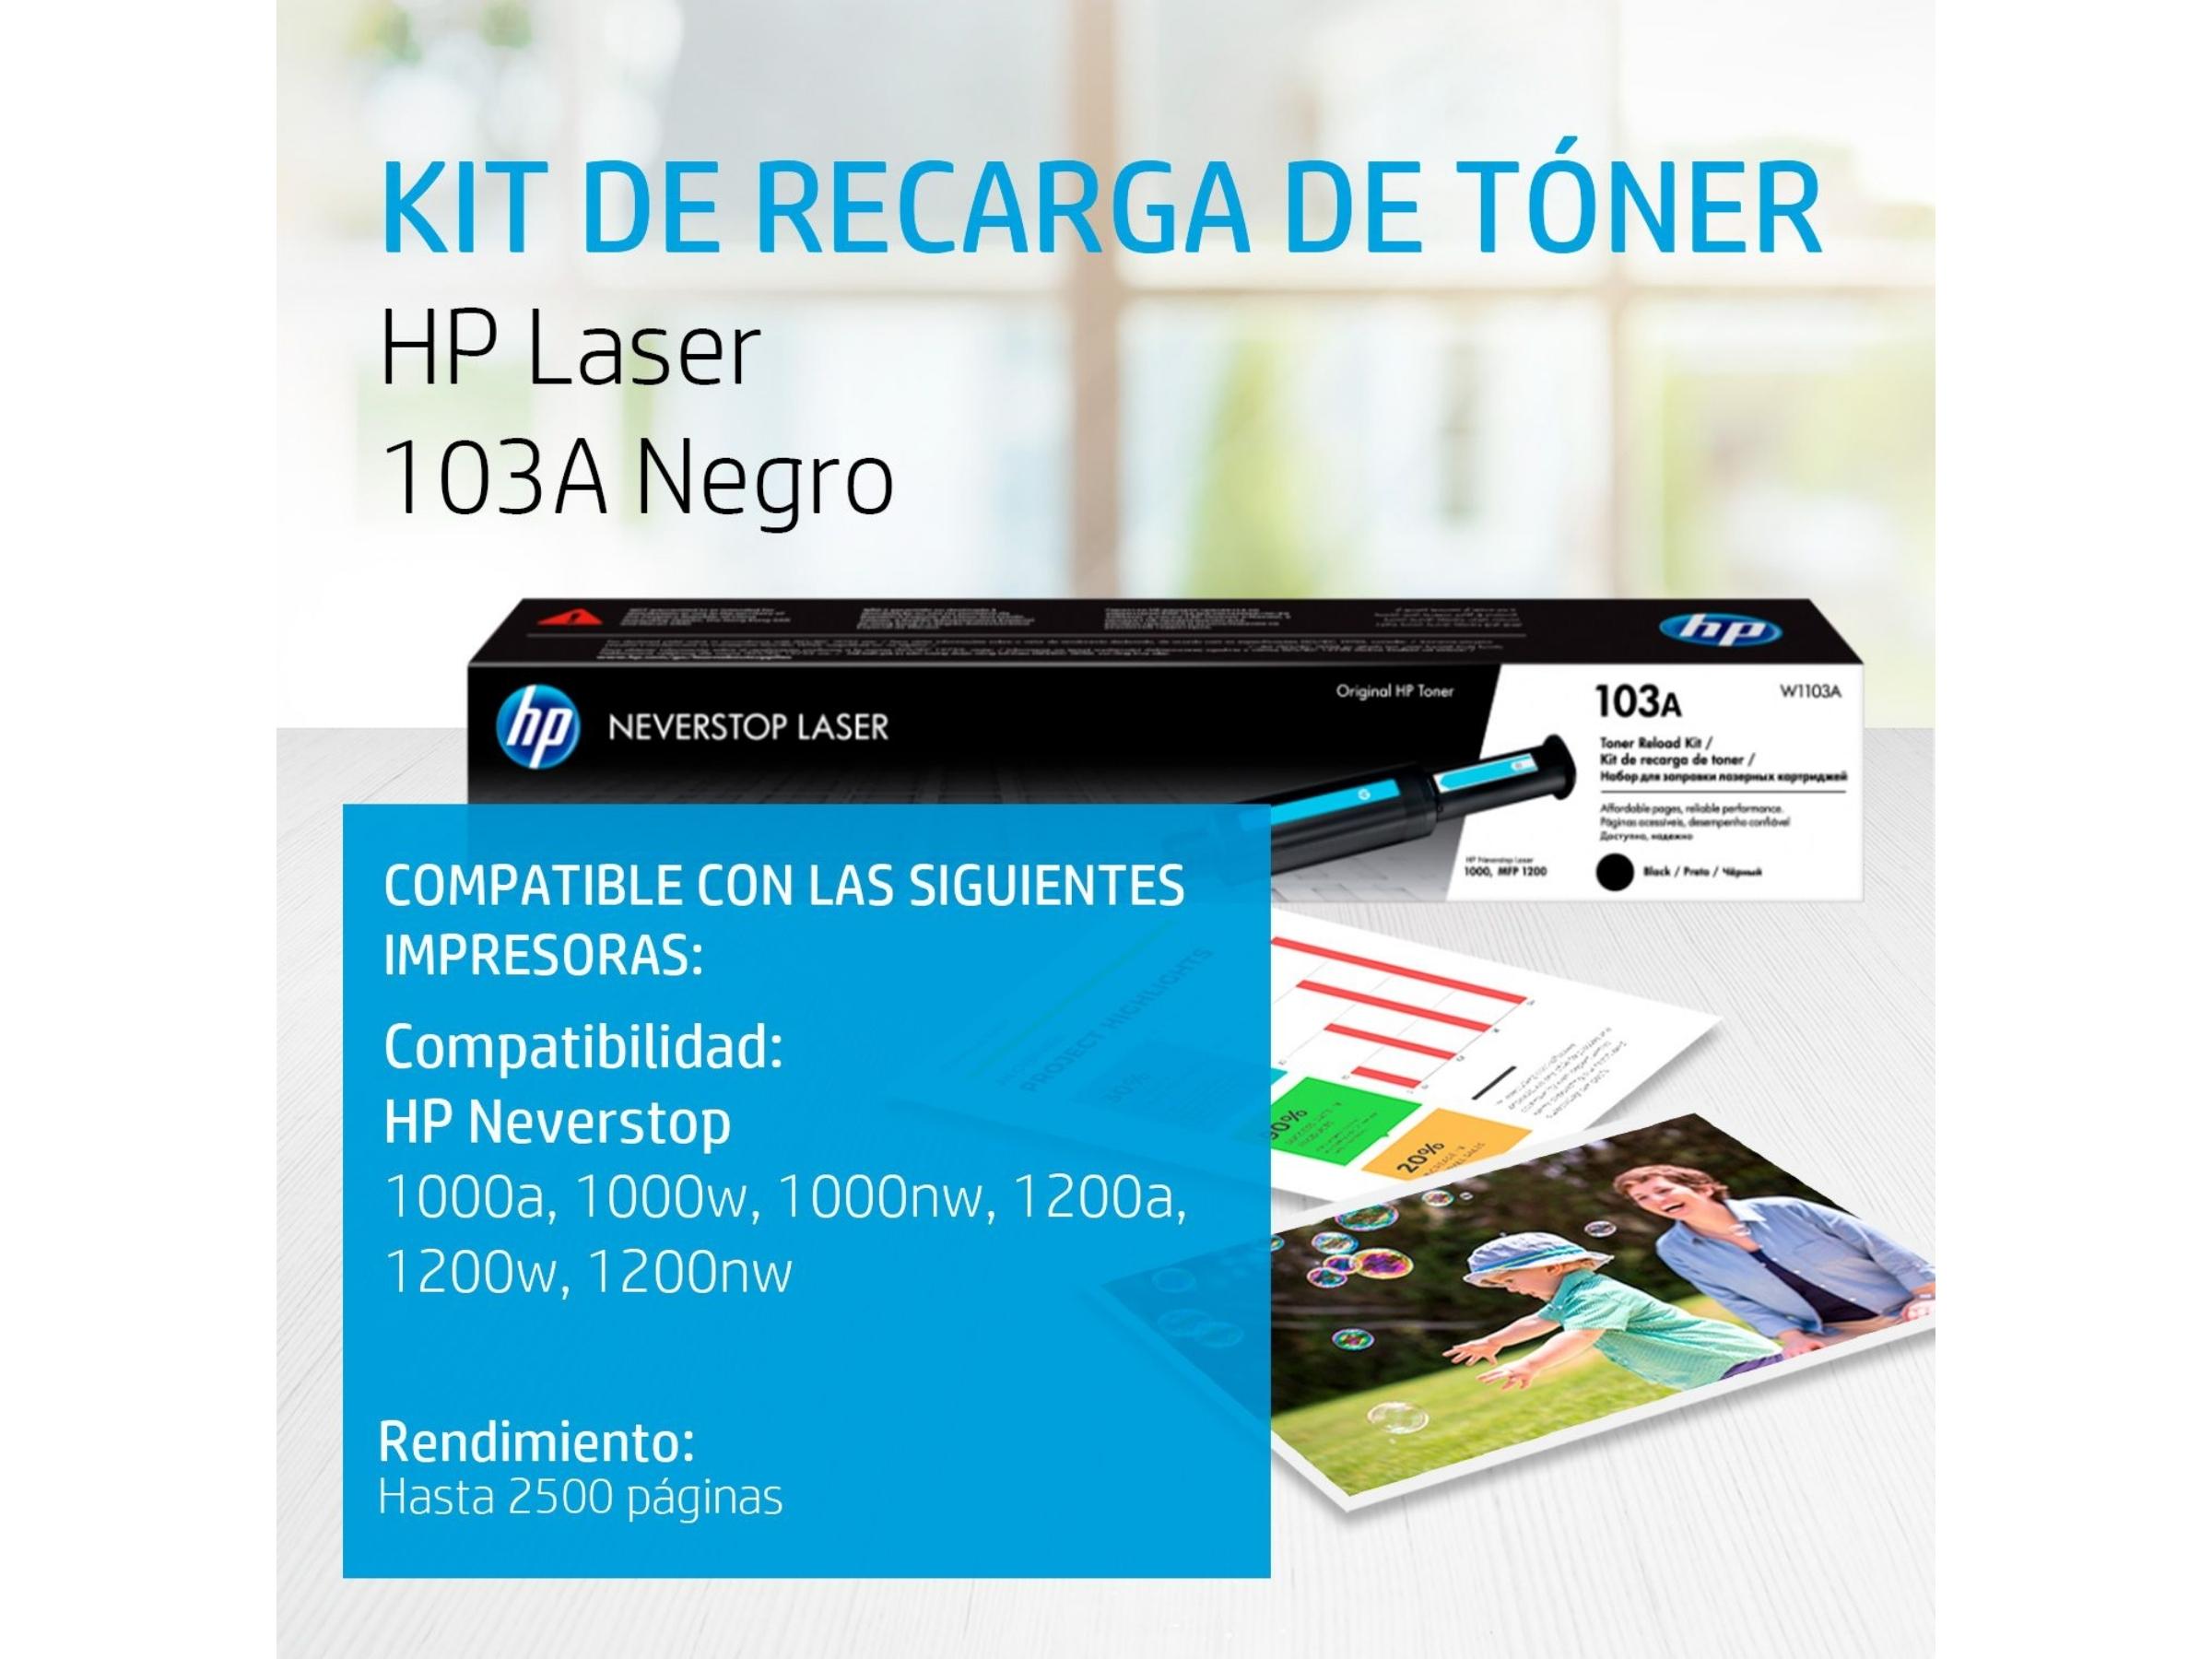 TONER HP 103A NEGRO (W1103A) LASER NEVERSTOP 1000/1200 2500 PAG